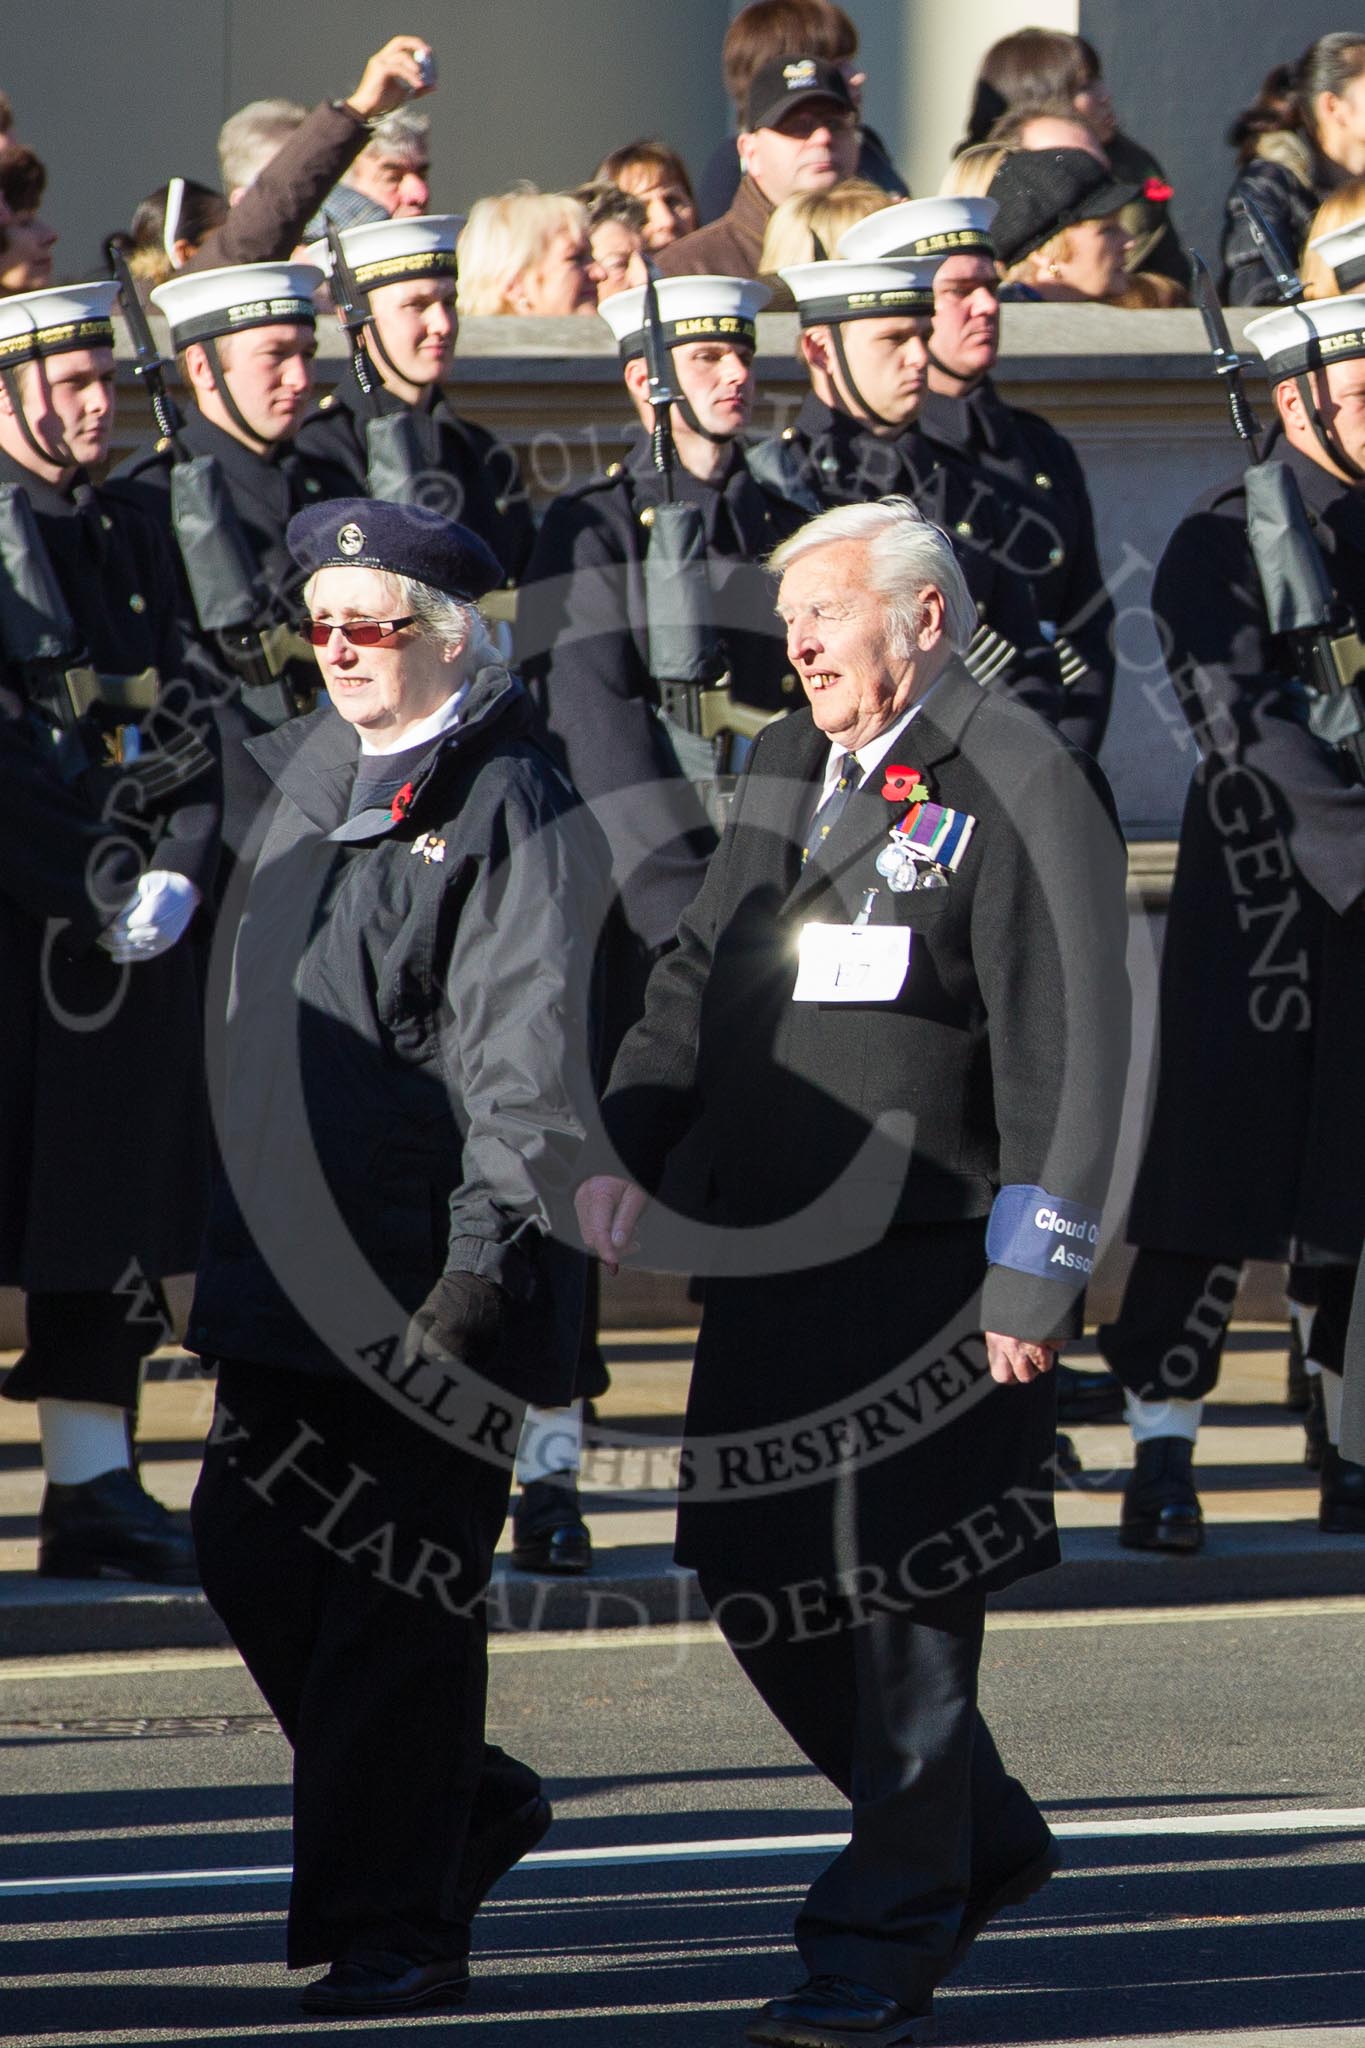 Remembrance Sunday 2012 Cenotaph March Past: Group E7 - Cloud Observers Association - would love t know more about the group!.
Whitehall, Cenotaph,
London SW1,

United Kingdom,
on 11 November 2012 at 11:39, image #90